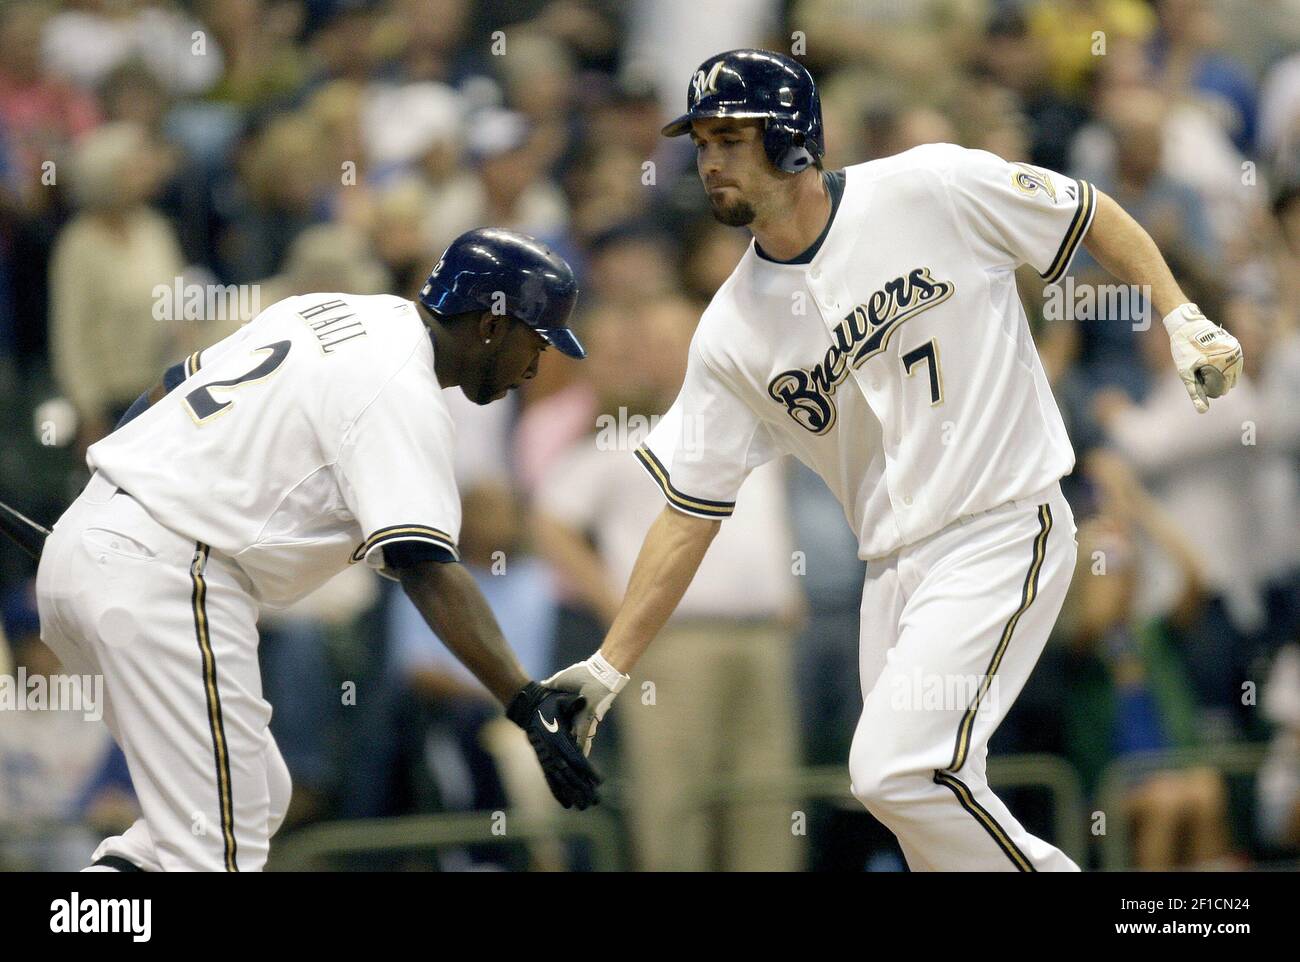 Milwaukee Brewers' Bill Hall greets J.J. Hardy who hit a home run in the  sixth inning against the Chicago Cubs at Miller Park in Milwaukee,  Wisconsin, on Friday, May 8, 2009. The